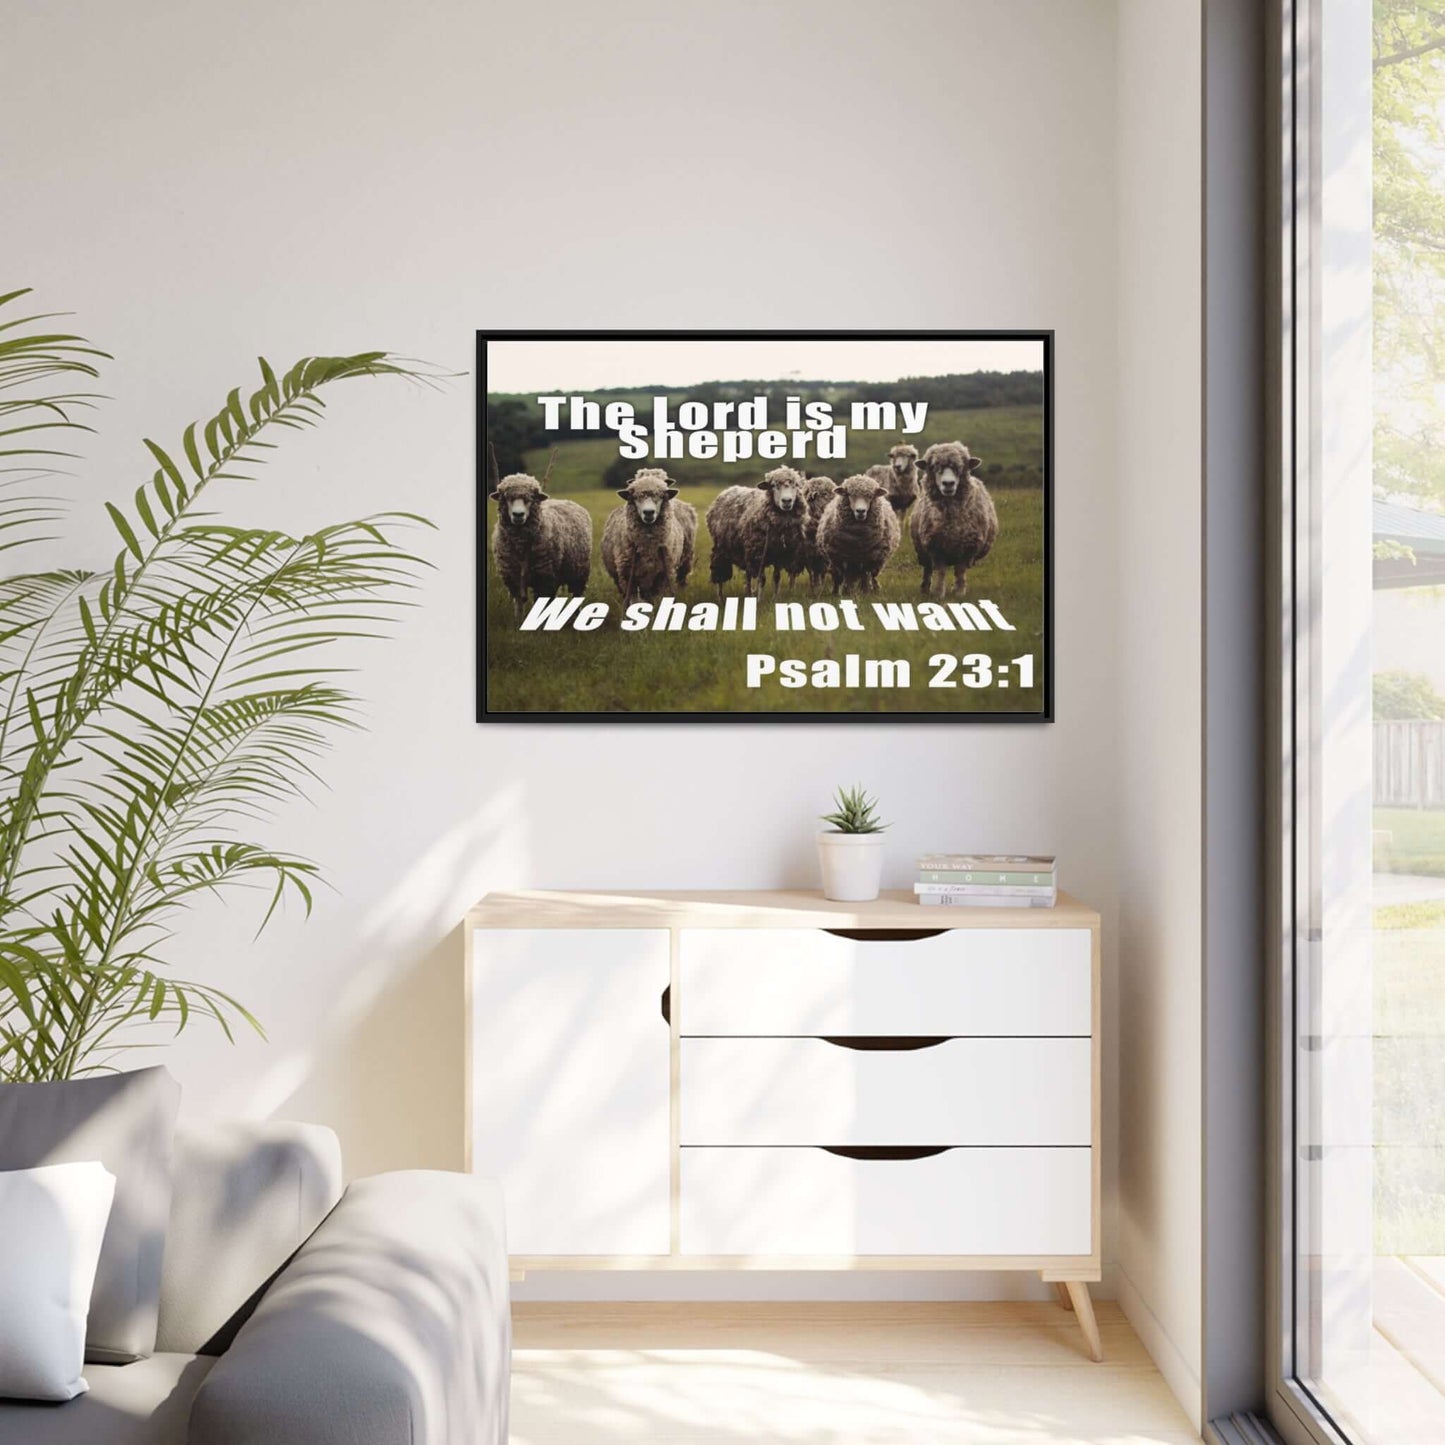 Elegant Canvas Painting with Frame - Psalm 23:1 | Art & Wall Decor,Canvas,Decor,Eco-friendly,Framed,Hanging Hardware,Home & Living,Summer Picks,Sustainable